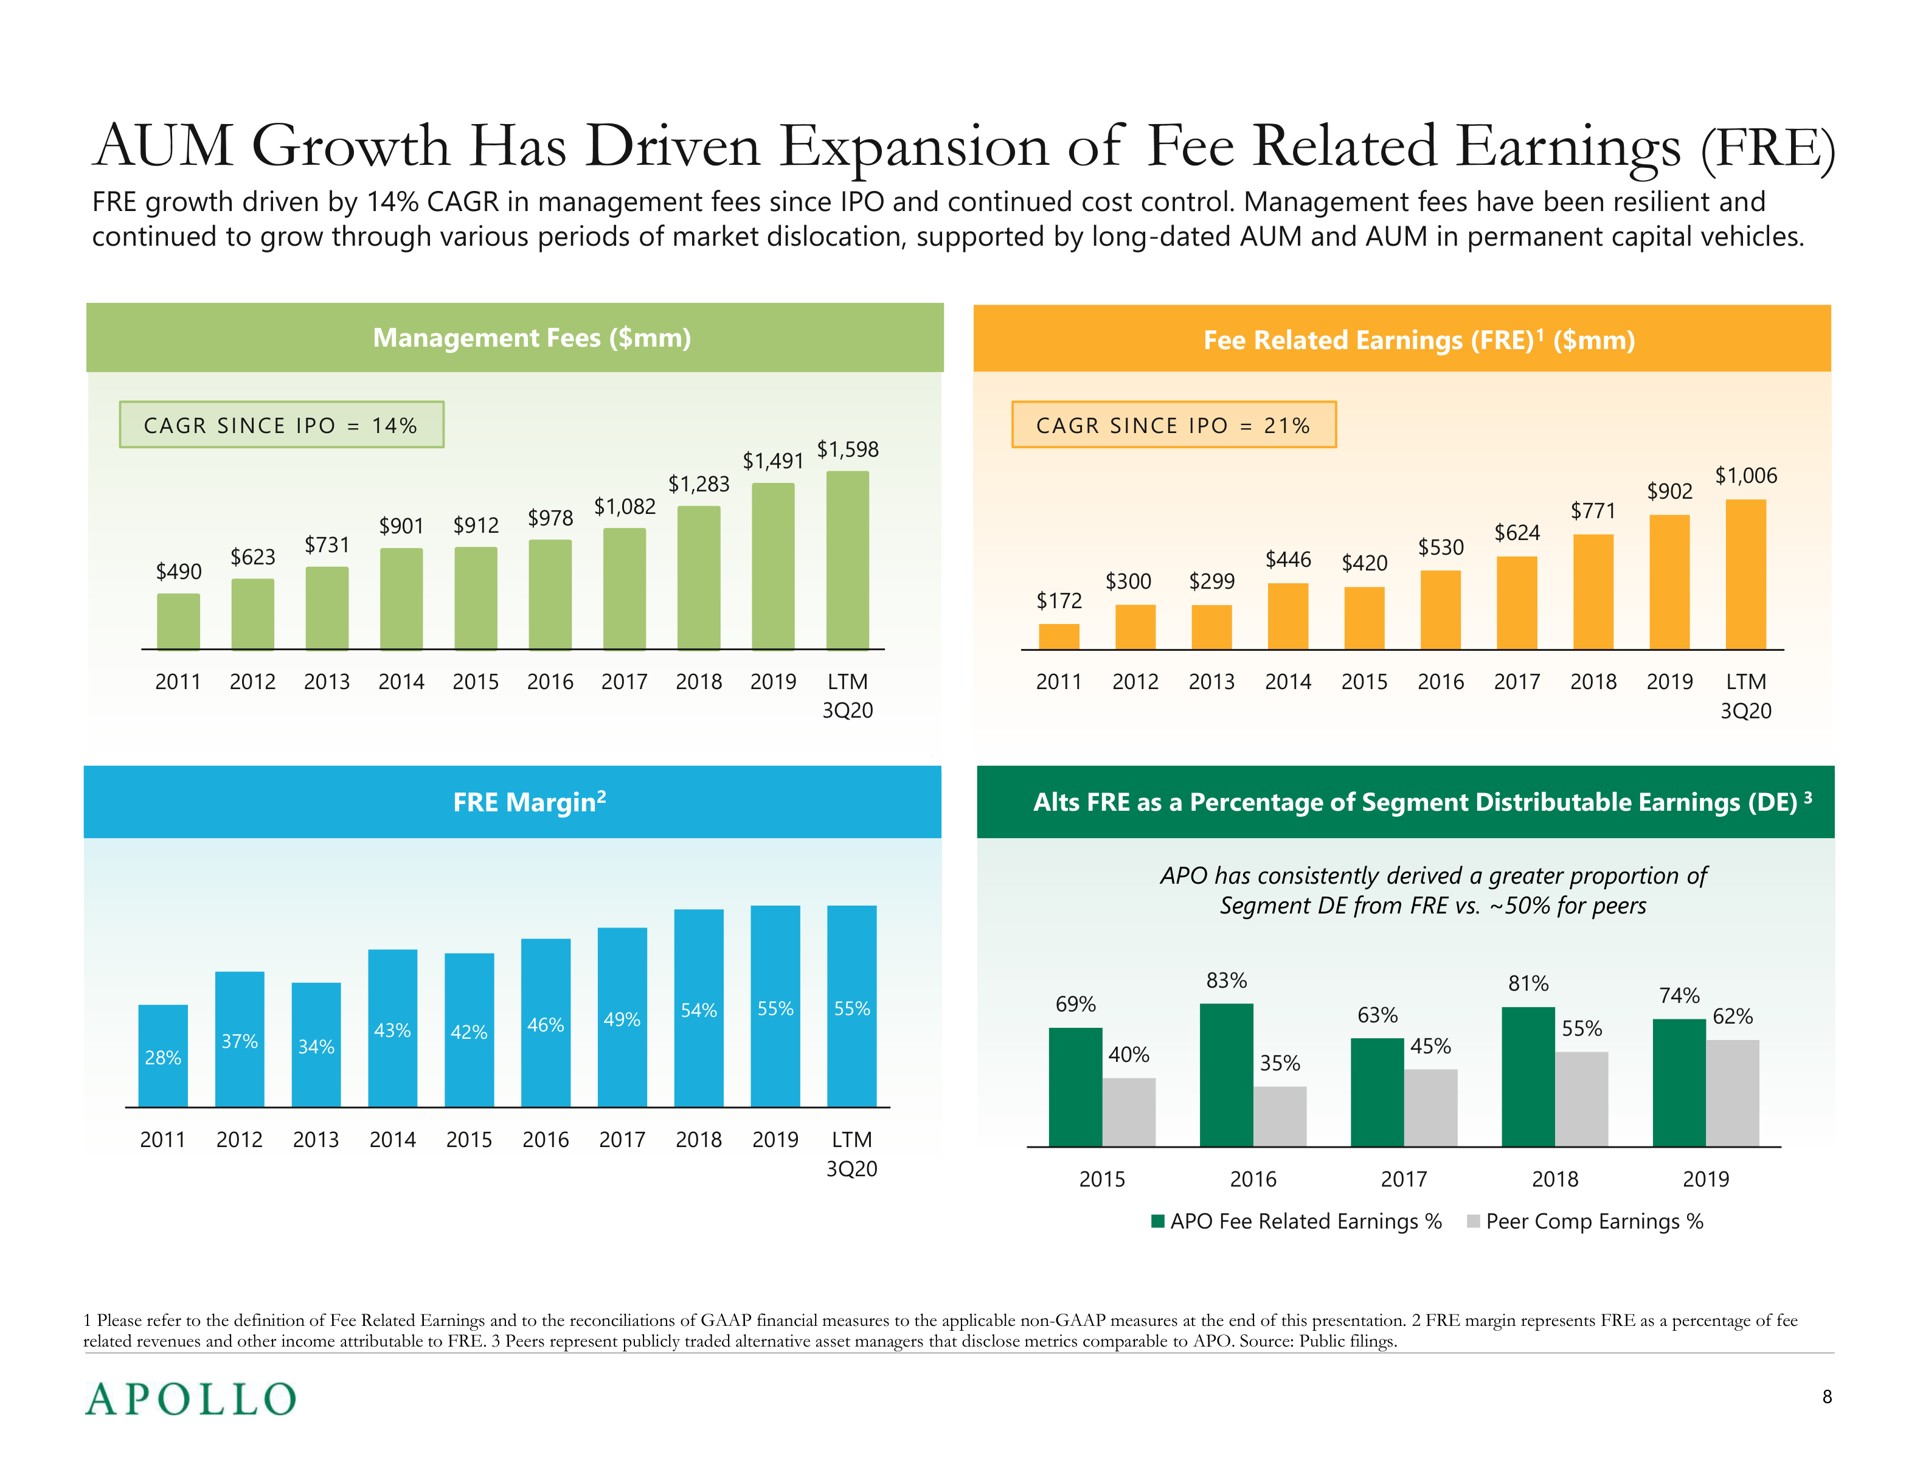 aum growth has driven expansion of fee related earnings | Apollo Global Management